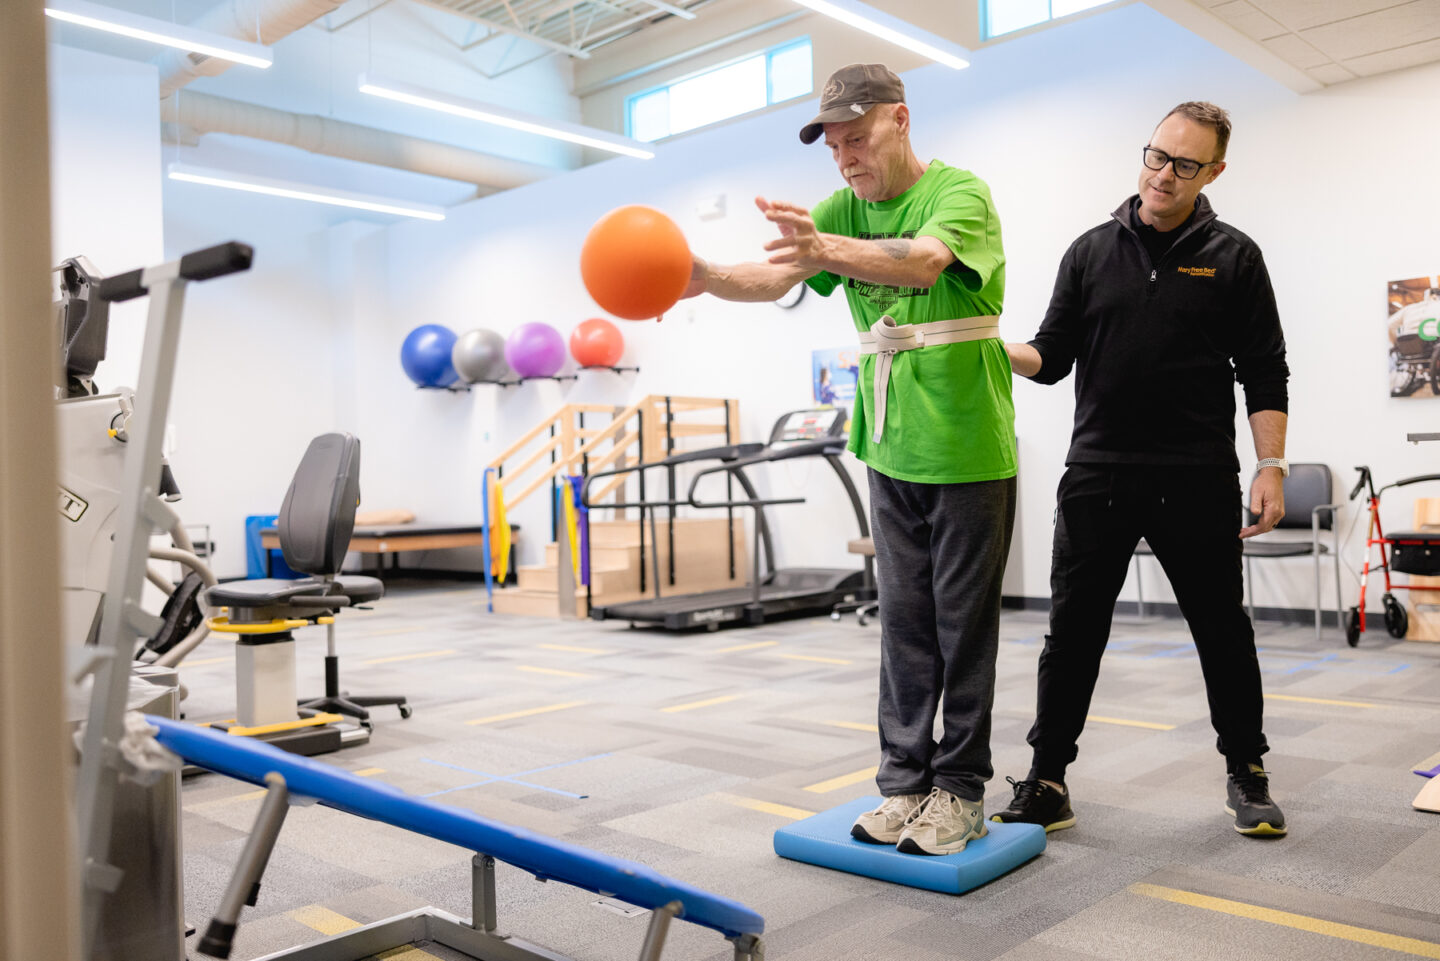 Physical therapist assisting older adult with balance exercise using a ball.